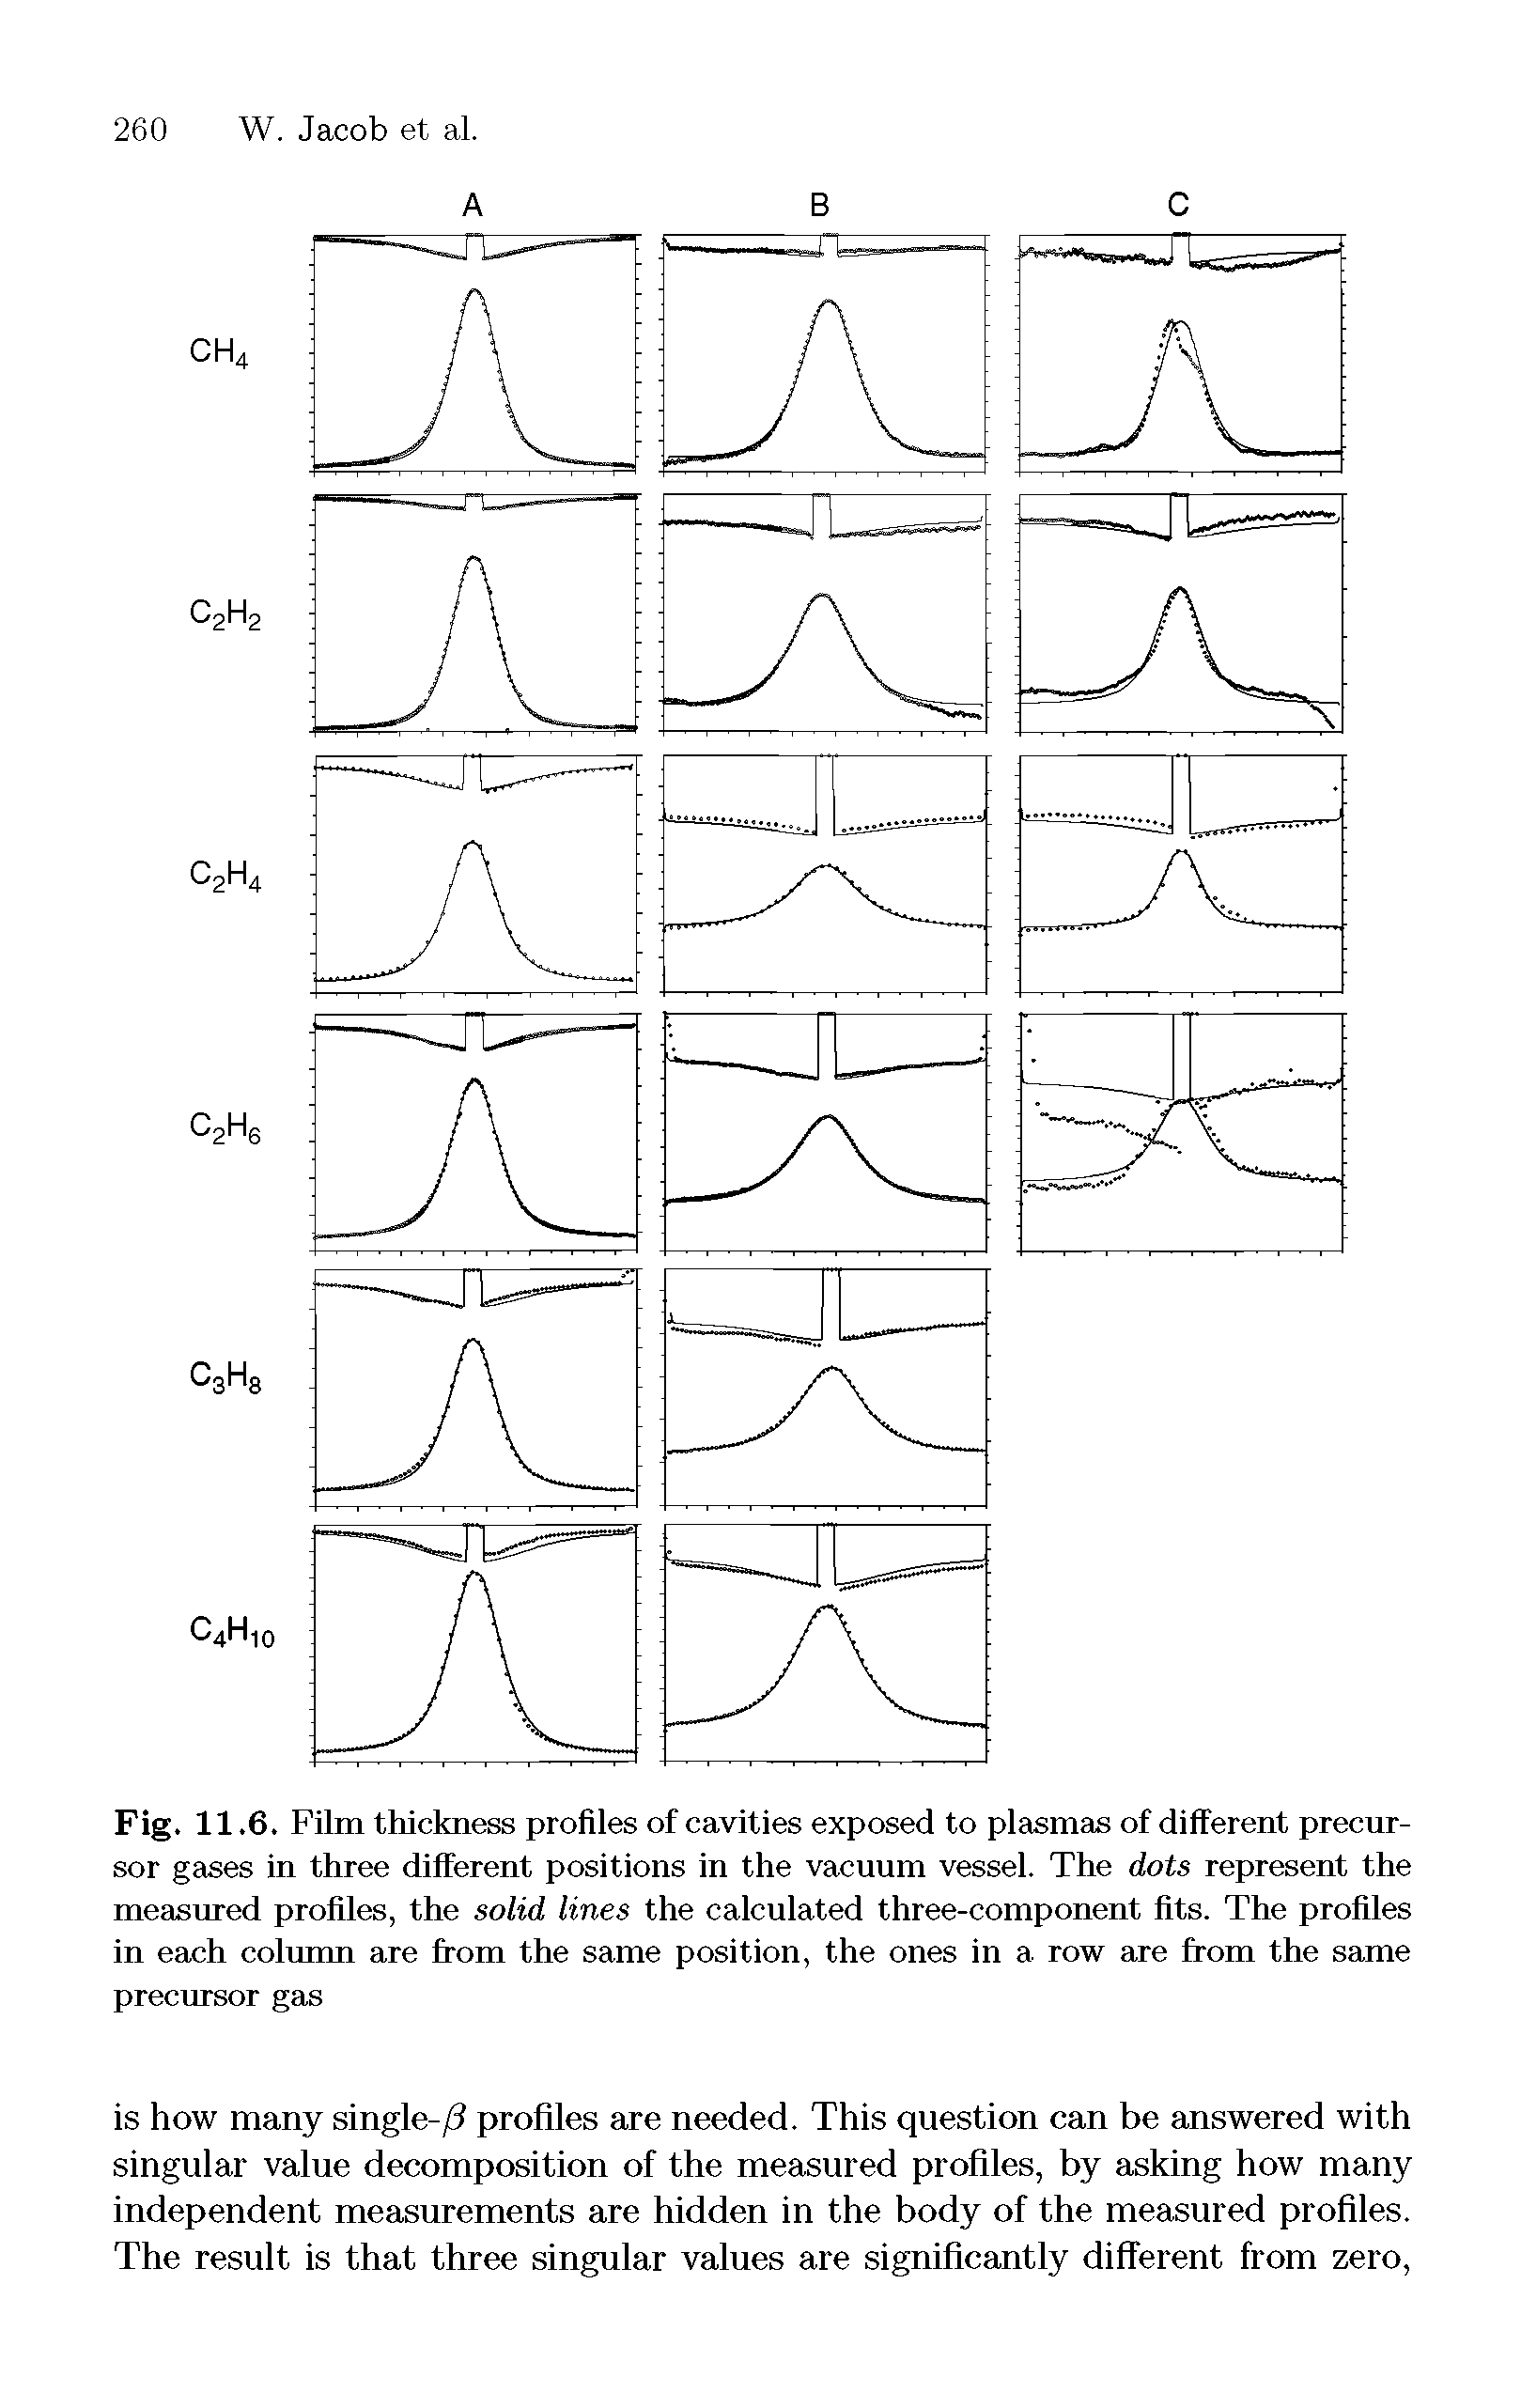 Fig. 11.6. Film thickness profiles of cavities exposed to plasmas of different precursor gases in three different positions in the vacuum vessel. The dots represent the measured profiles, the solid lines the calculated three-component fits. The profiles in each column are from the same position, the ones in a row are from the same precursor gas...